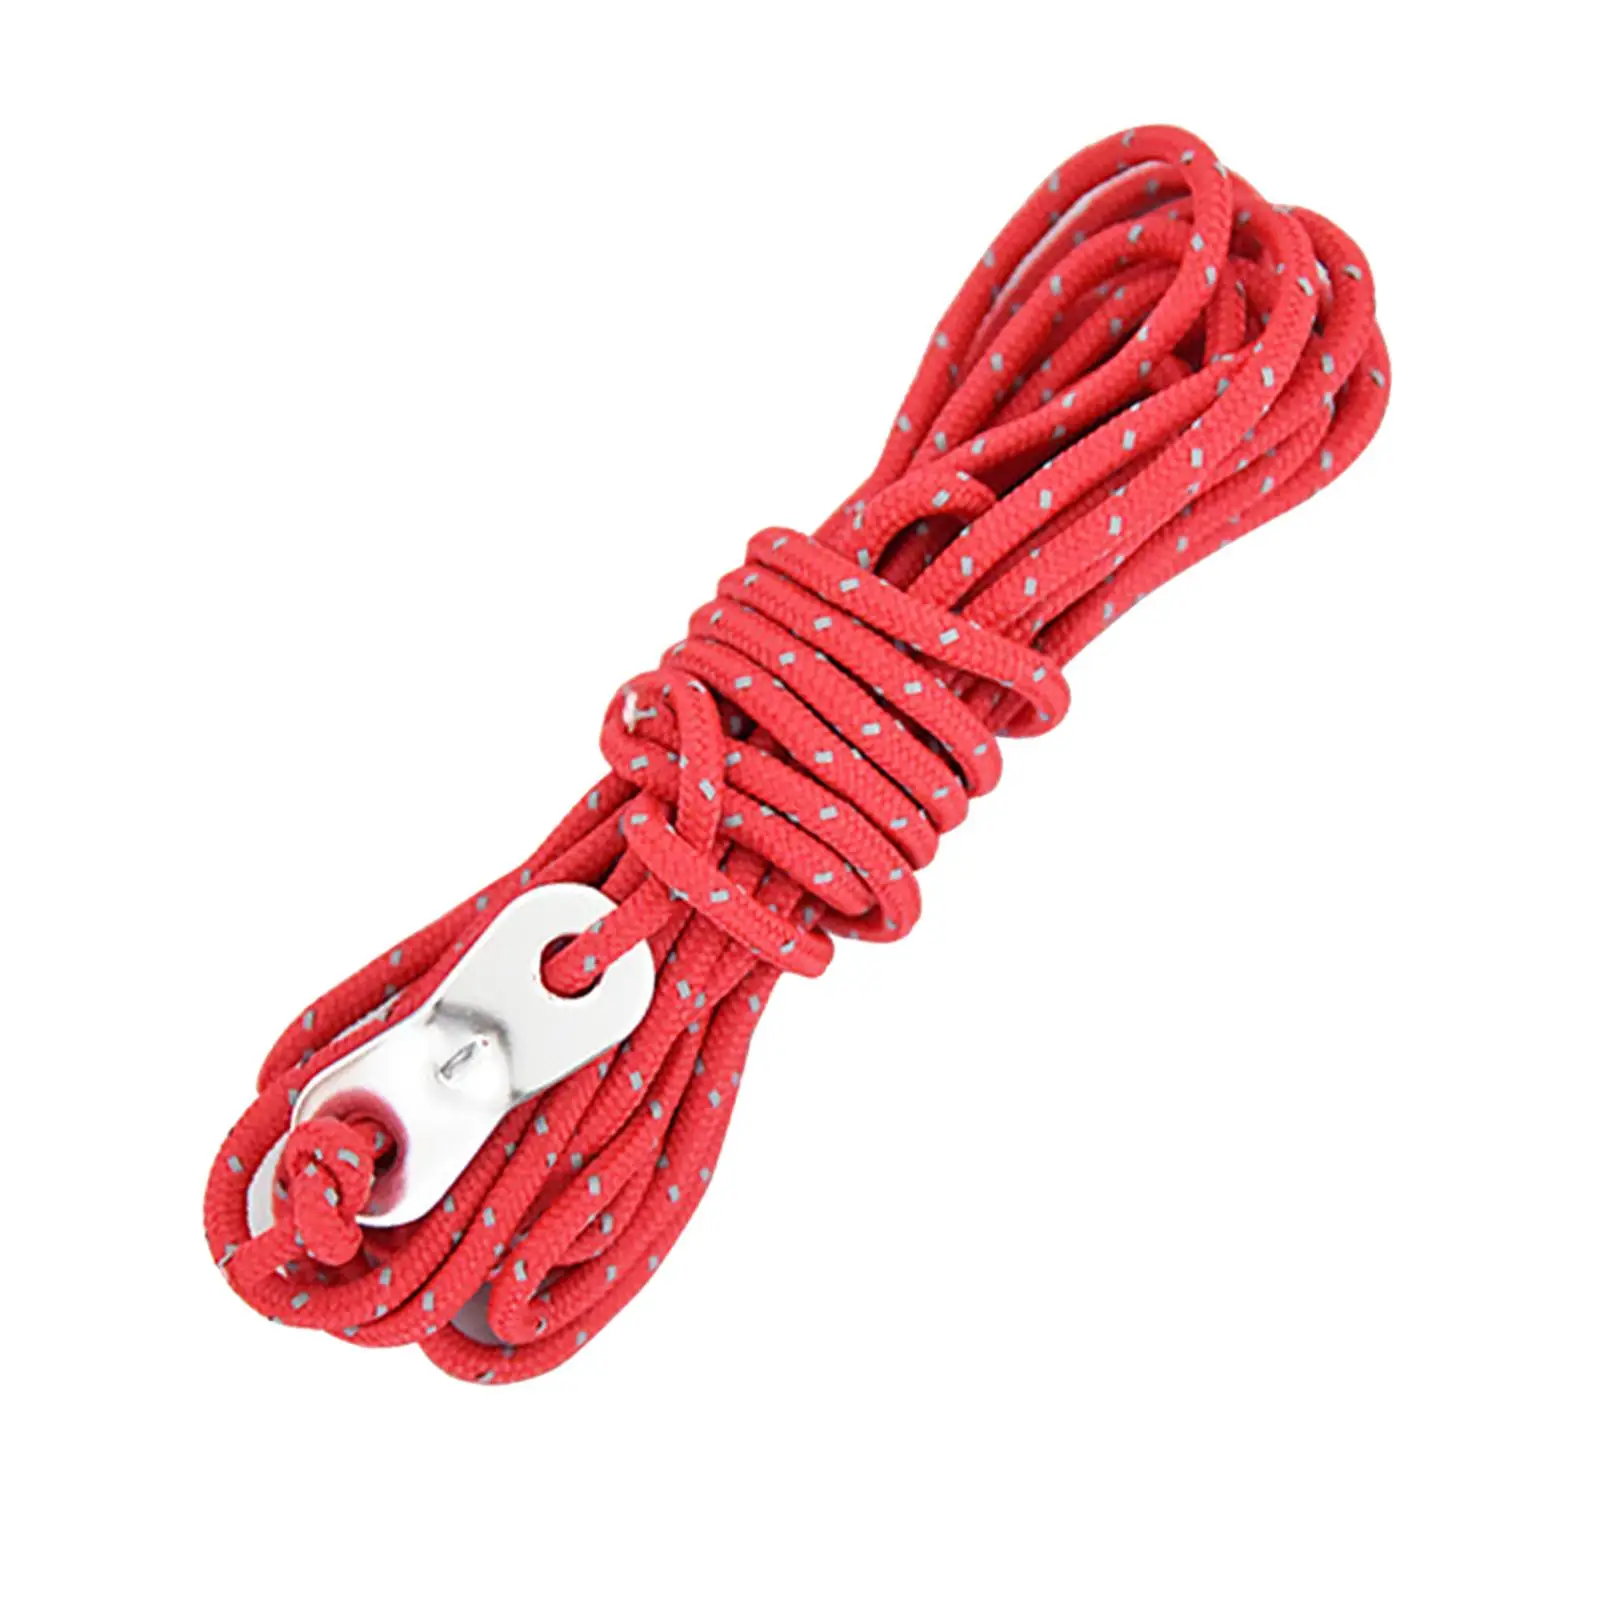 2x Windproof Wind Rope with Adjustment Buckle Accs Loose Proof for Camping Tent Survival